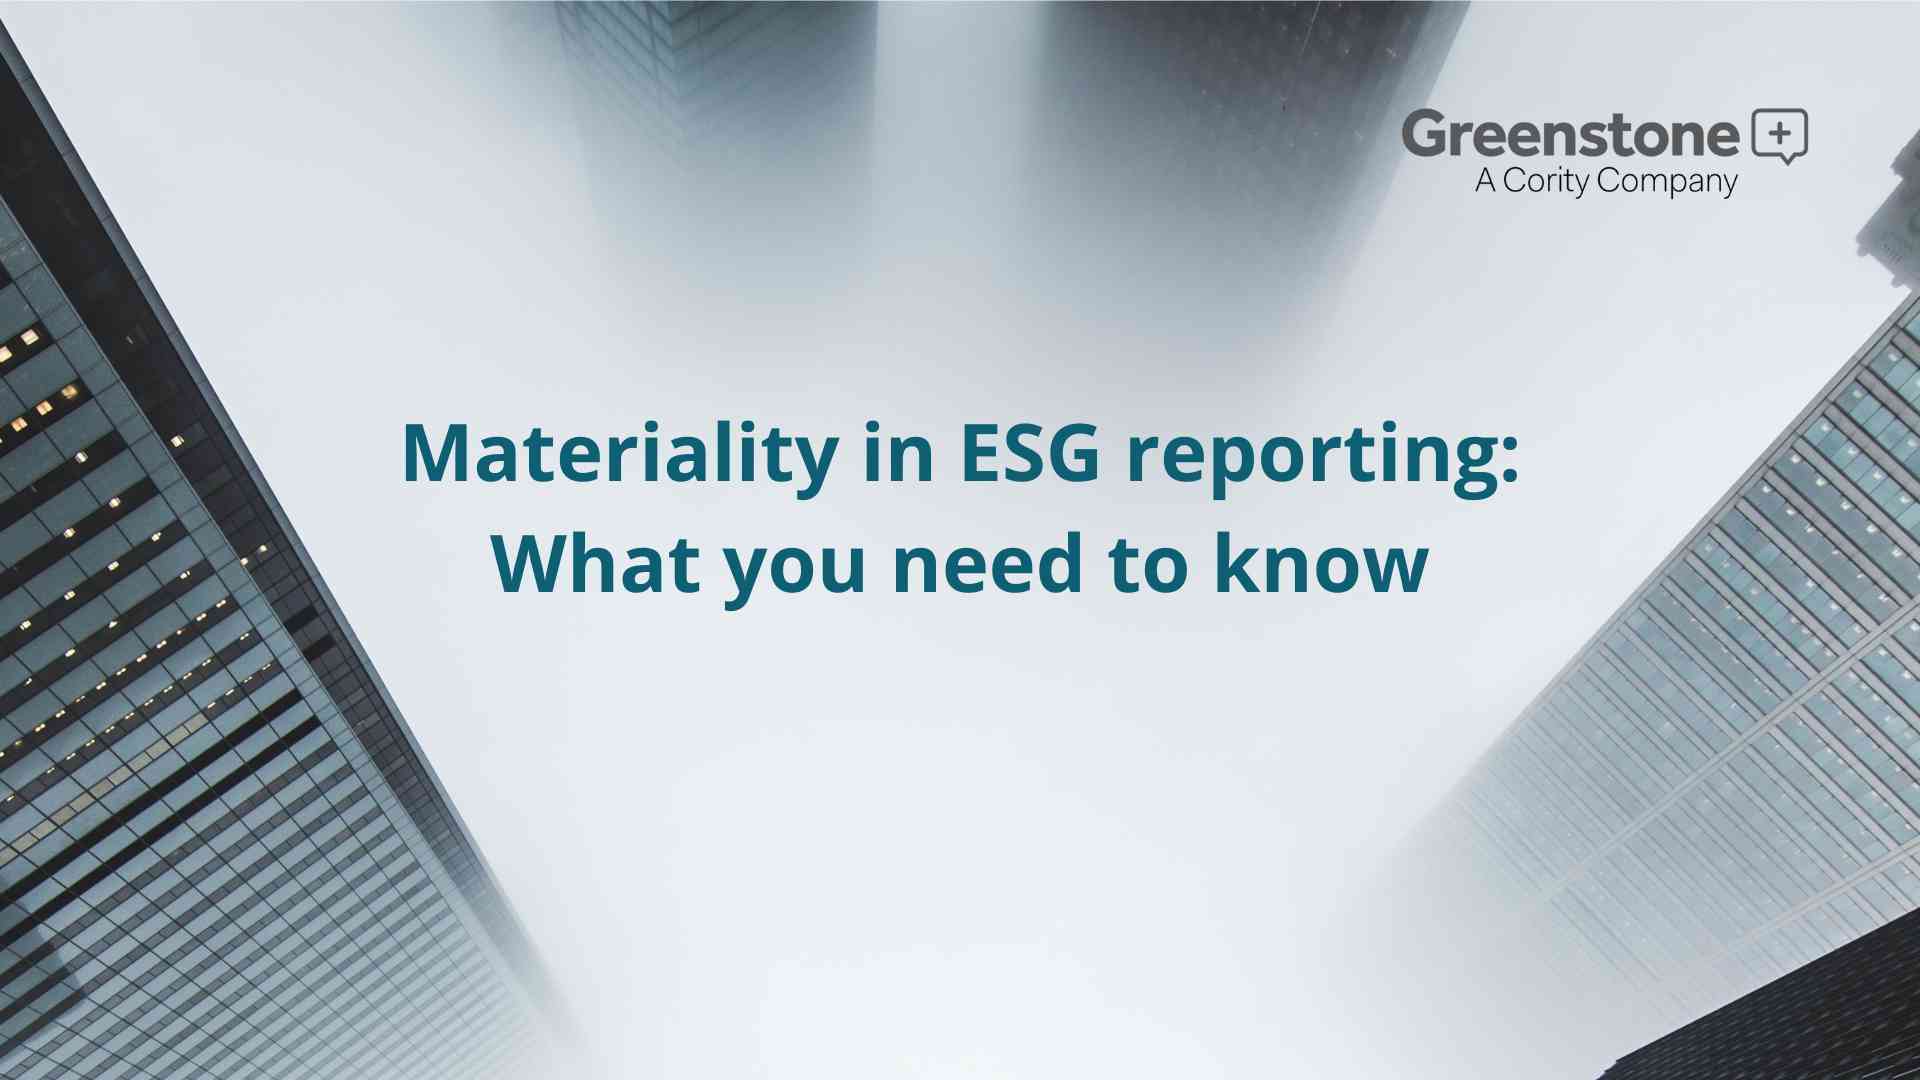 Materiality in ESG reporting: What you need to know